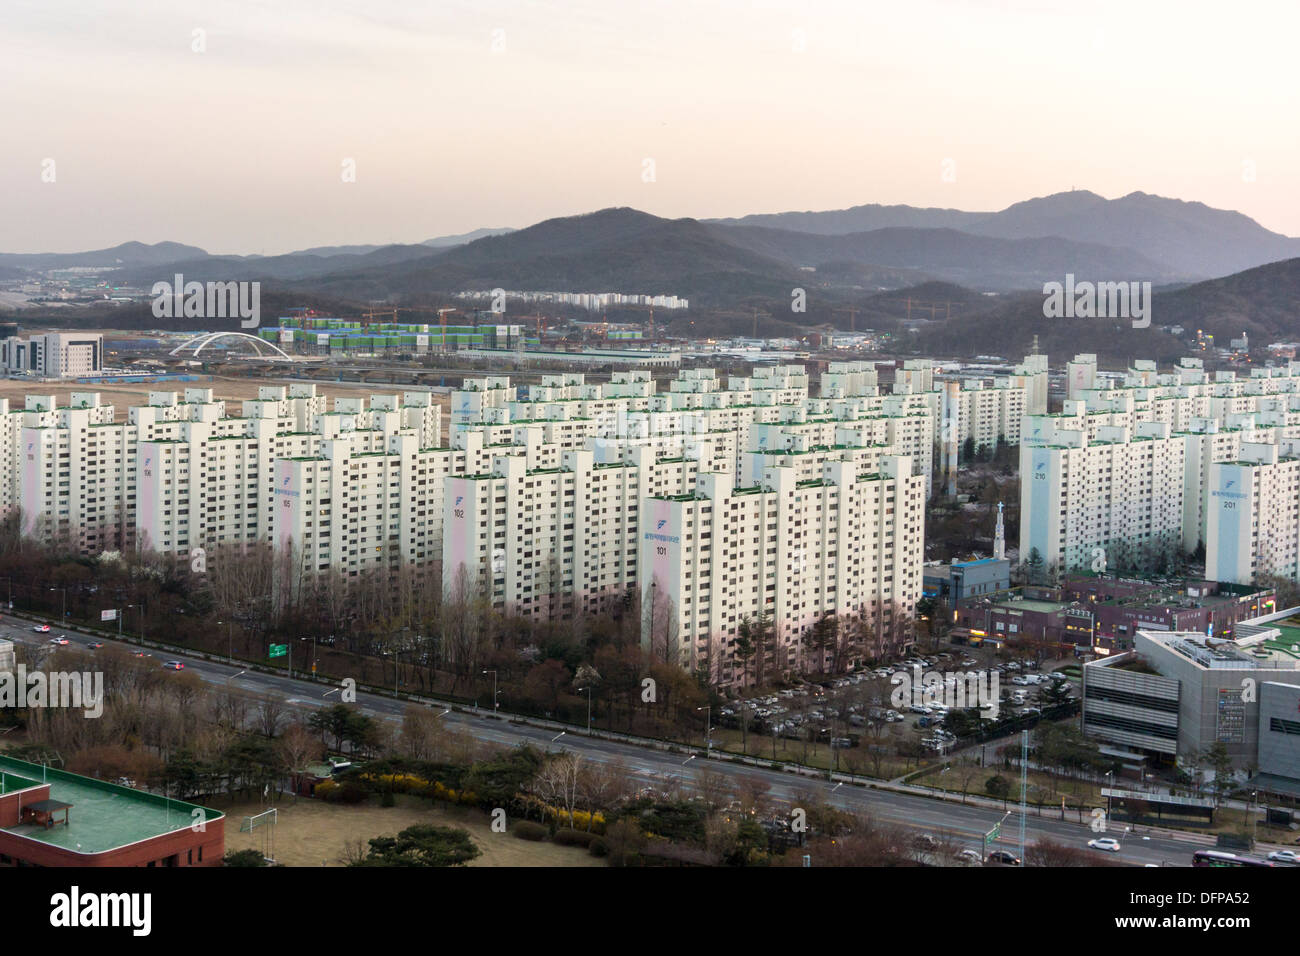 Skyline of Seoul, Korea with high-rise apartment blocks. Seoul is a city with a population of over 10 million. Stock Photo